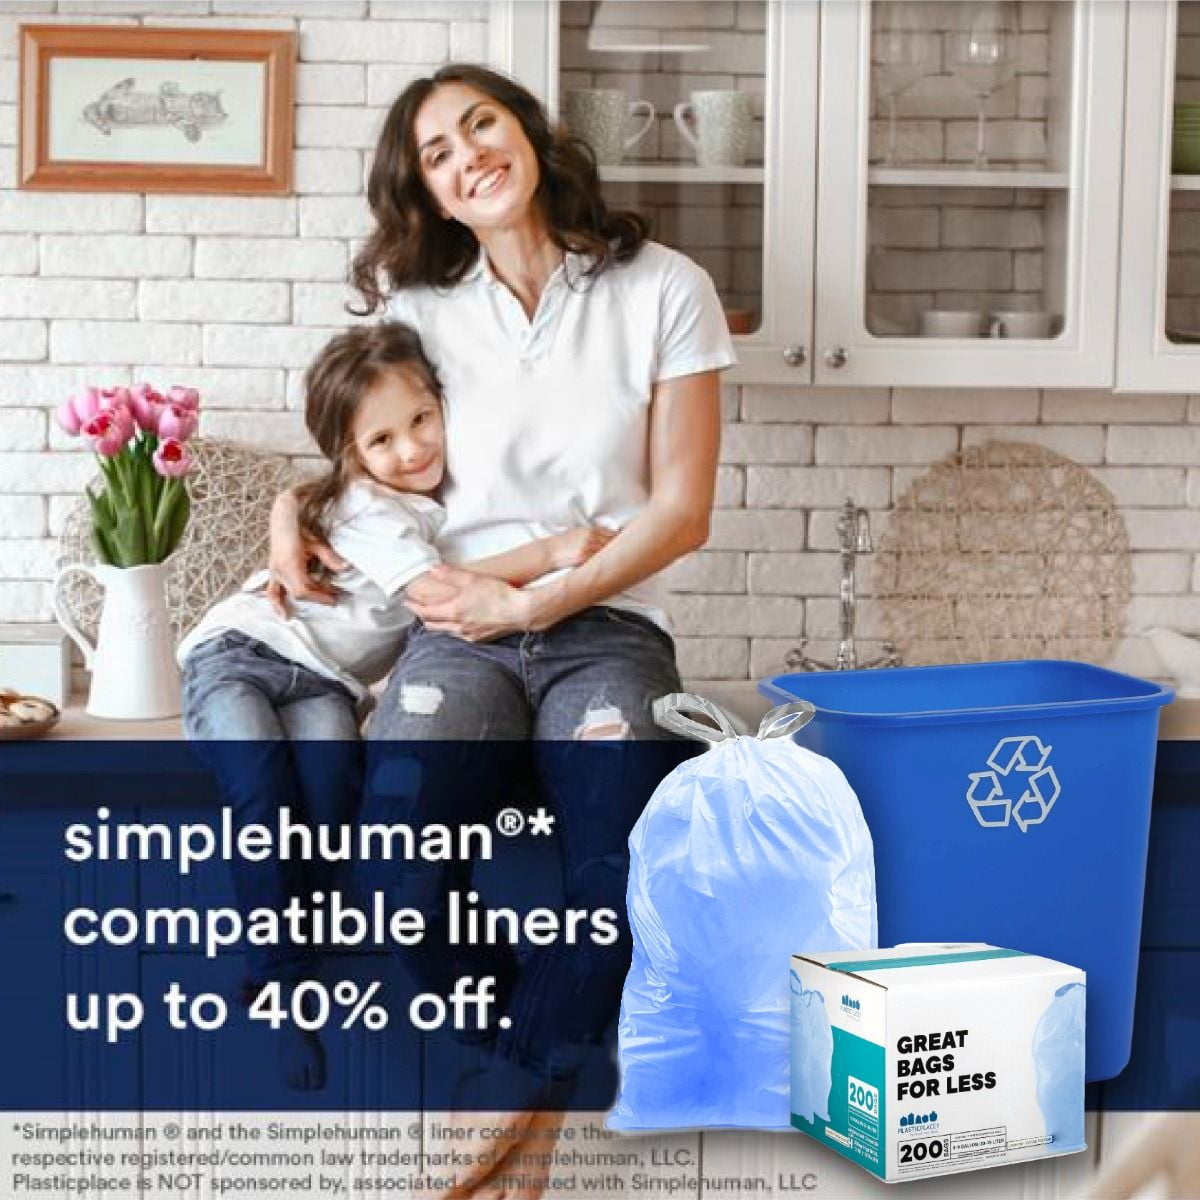 Compatible With Simplehuman Code H - 2 Refill Rolls (100 Count), Durable  Custom Fit Plastic Trash Bags w/Drawstring - 30-35 Liter/ 8-9 Gallon Trash